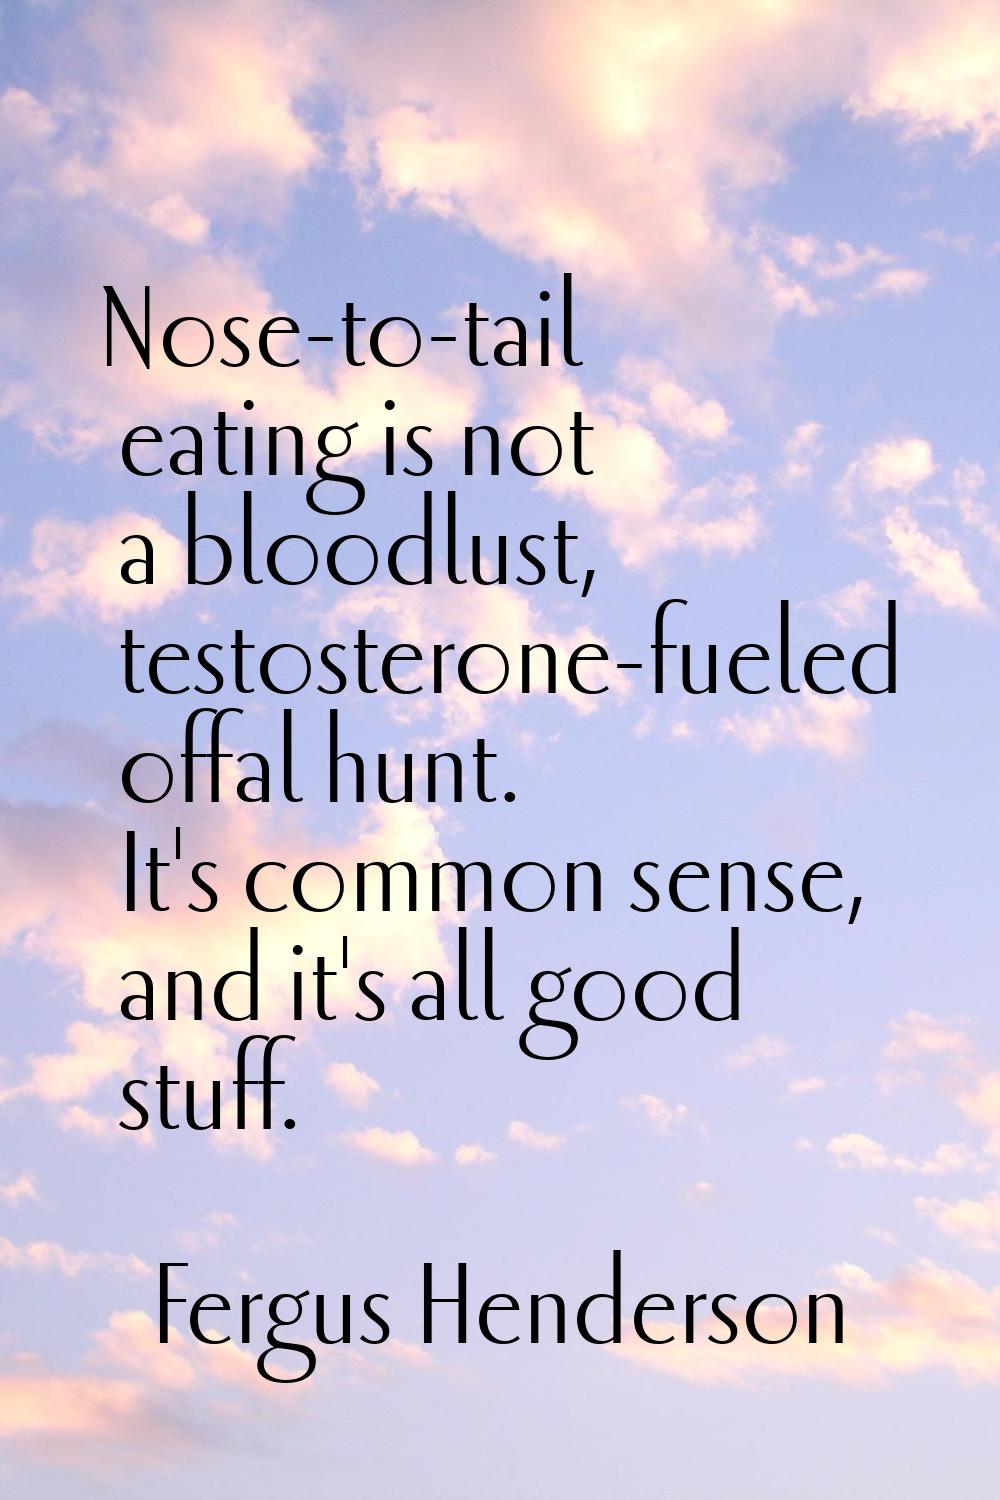 Nose-to-tail eating is not a bloodlust, testosterone-fueled offal hunt. It's common sense, and it's